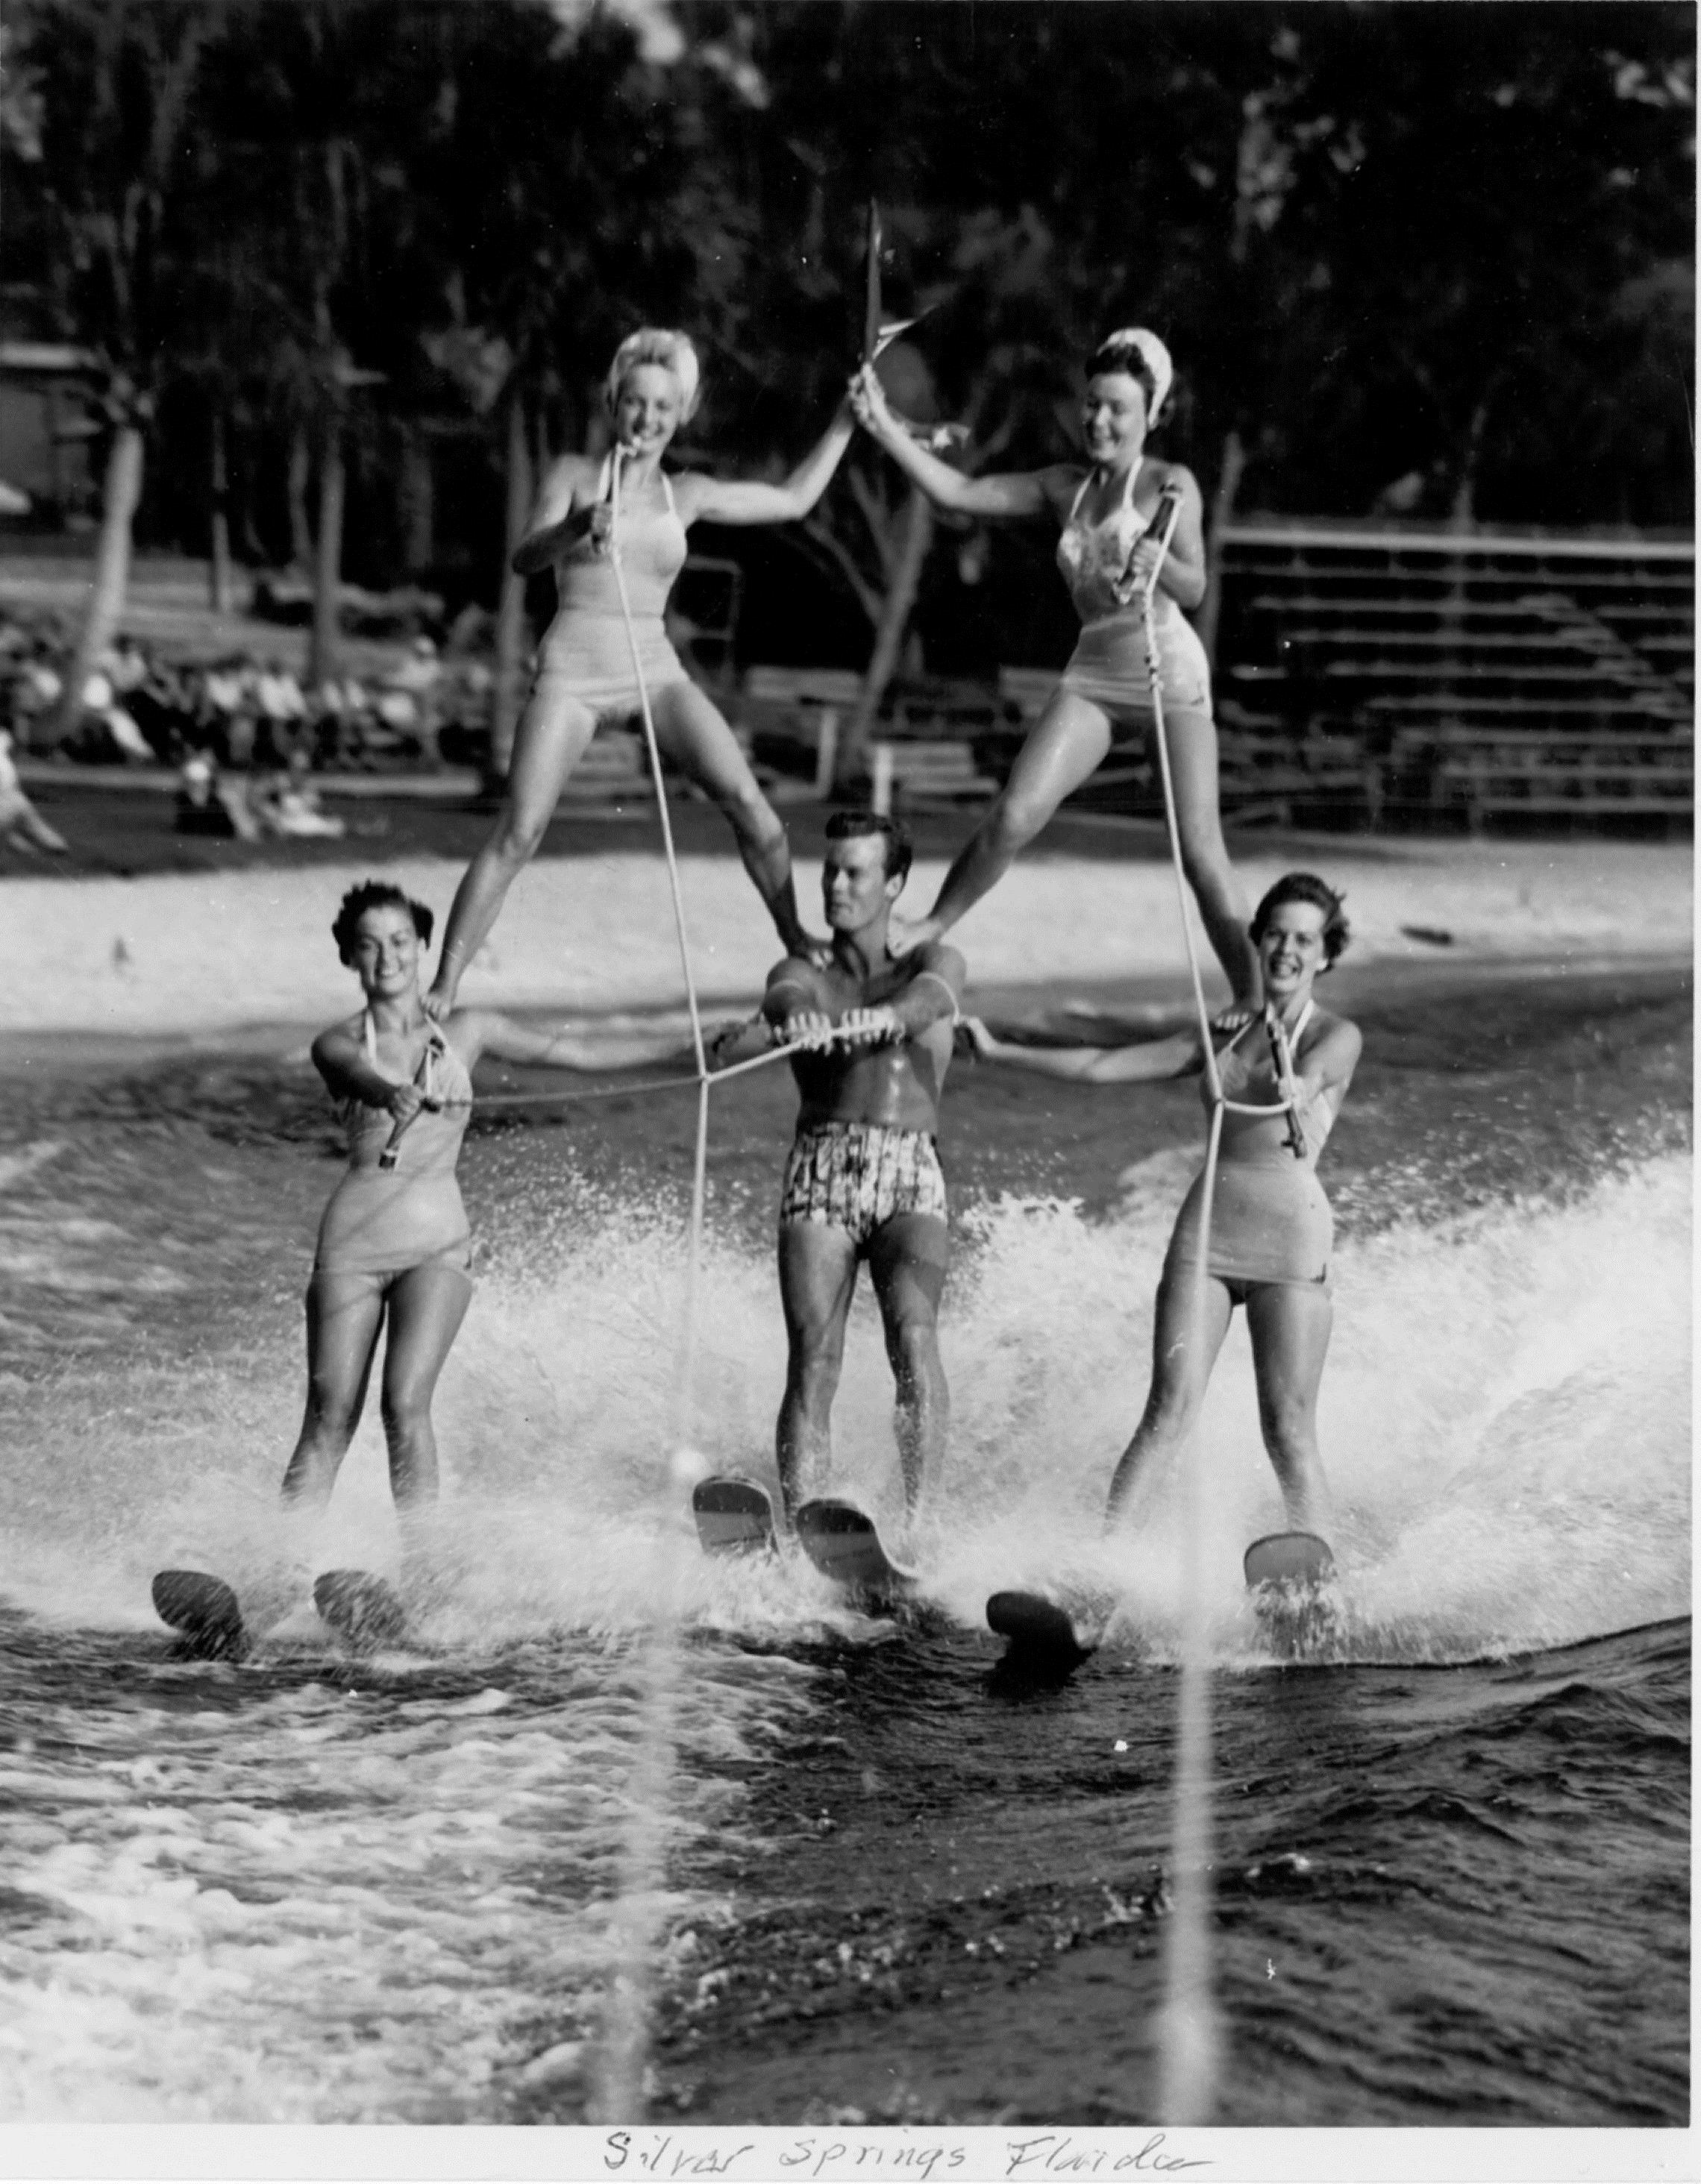  Possible that Bob also stopped in Silver Springs, Fla., and again performed with the water skiers in the water shows there (in different swim trunks). But his sister Lillian may not have the correct location.   